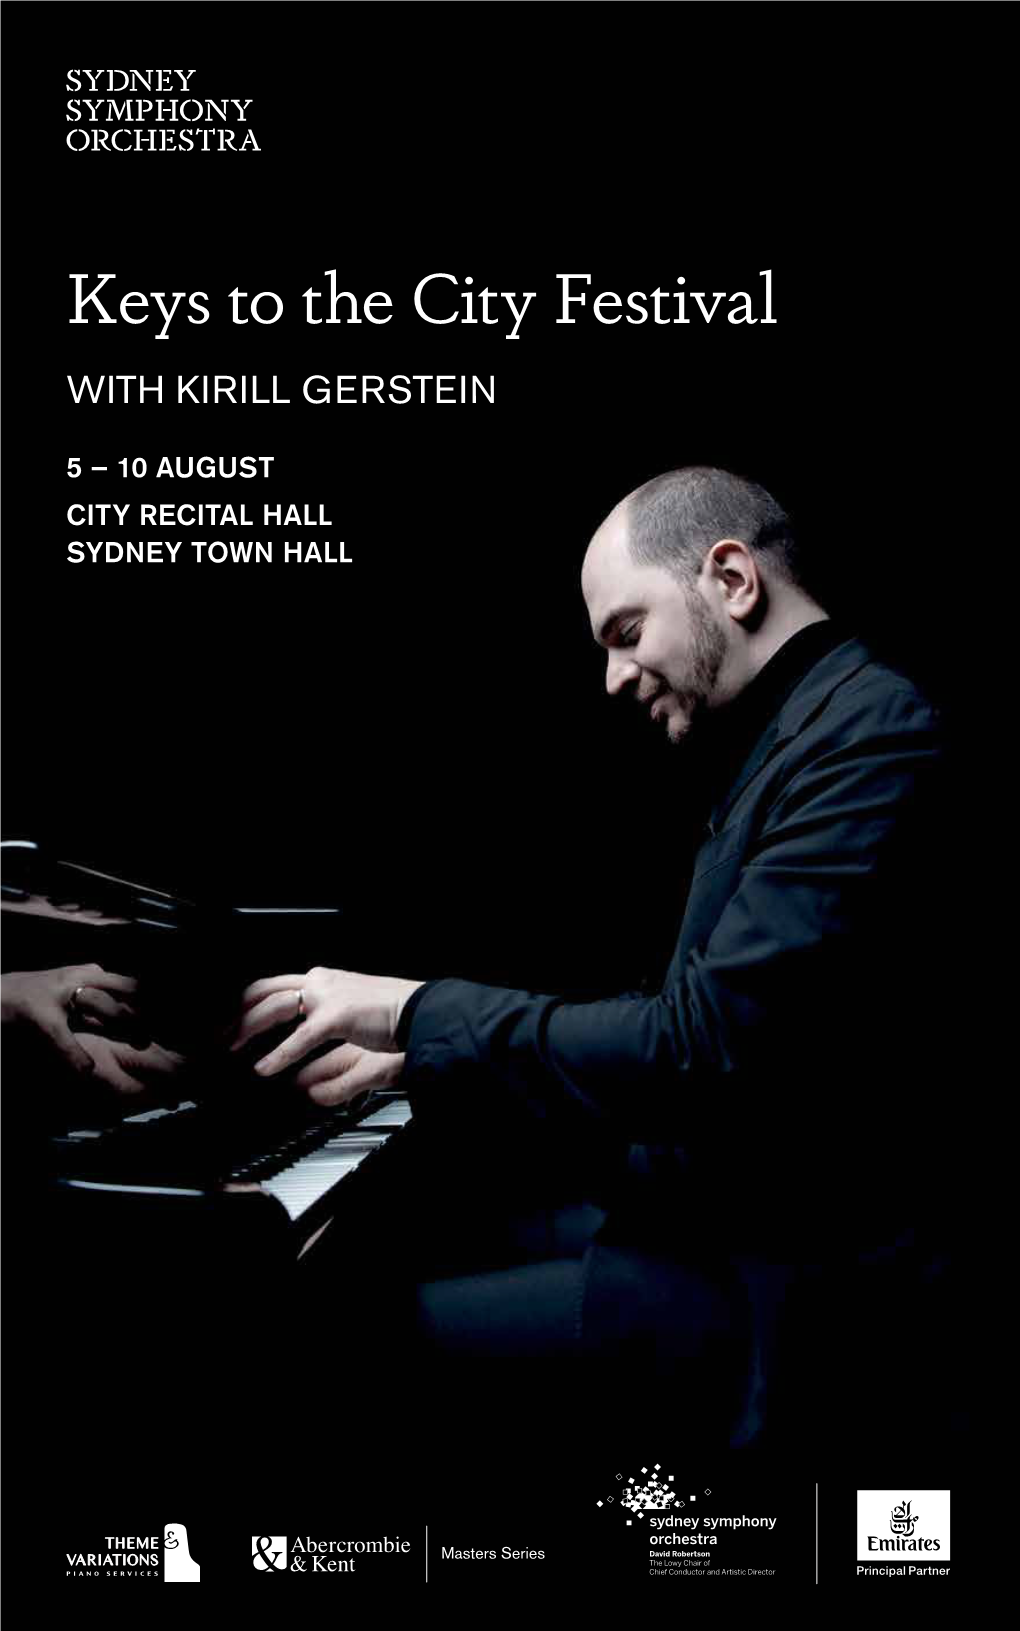 Keys to the City Festival with KIRILL GERSTEIN